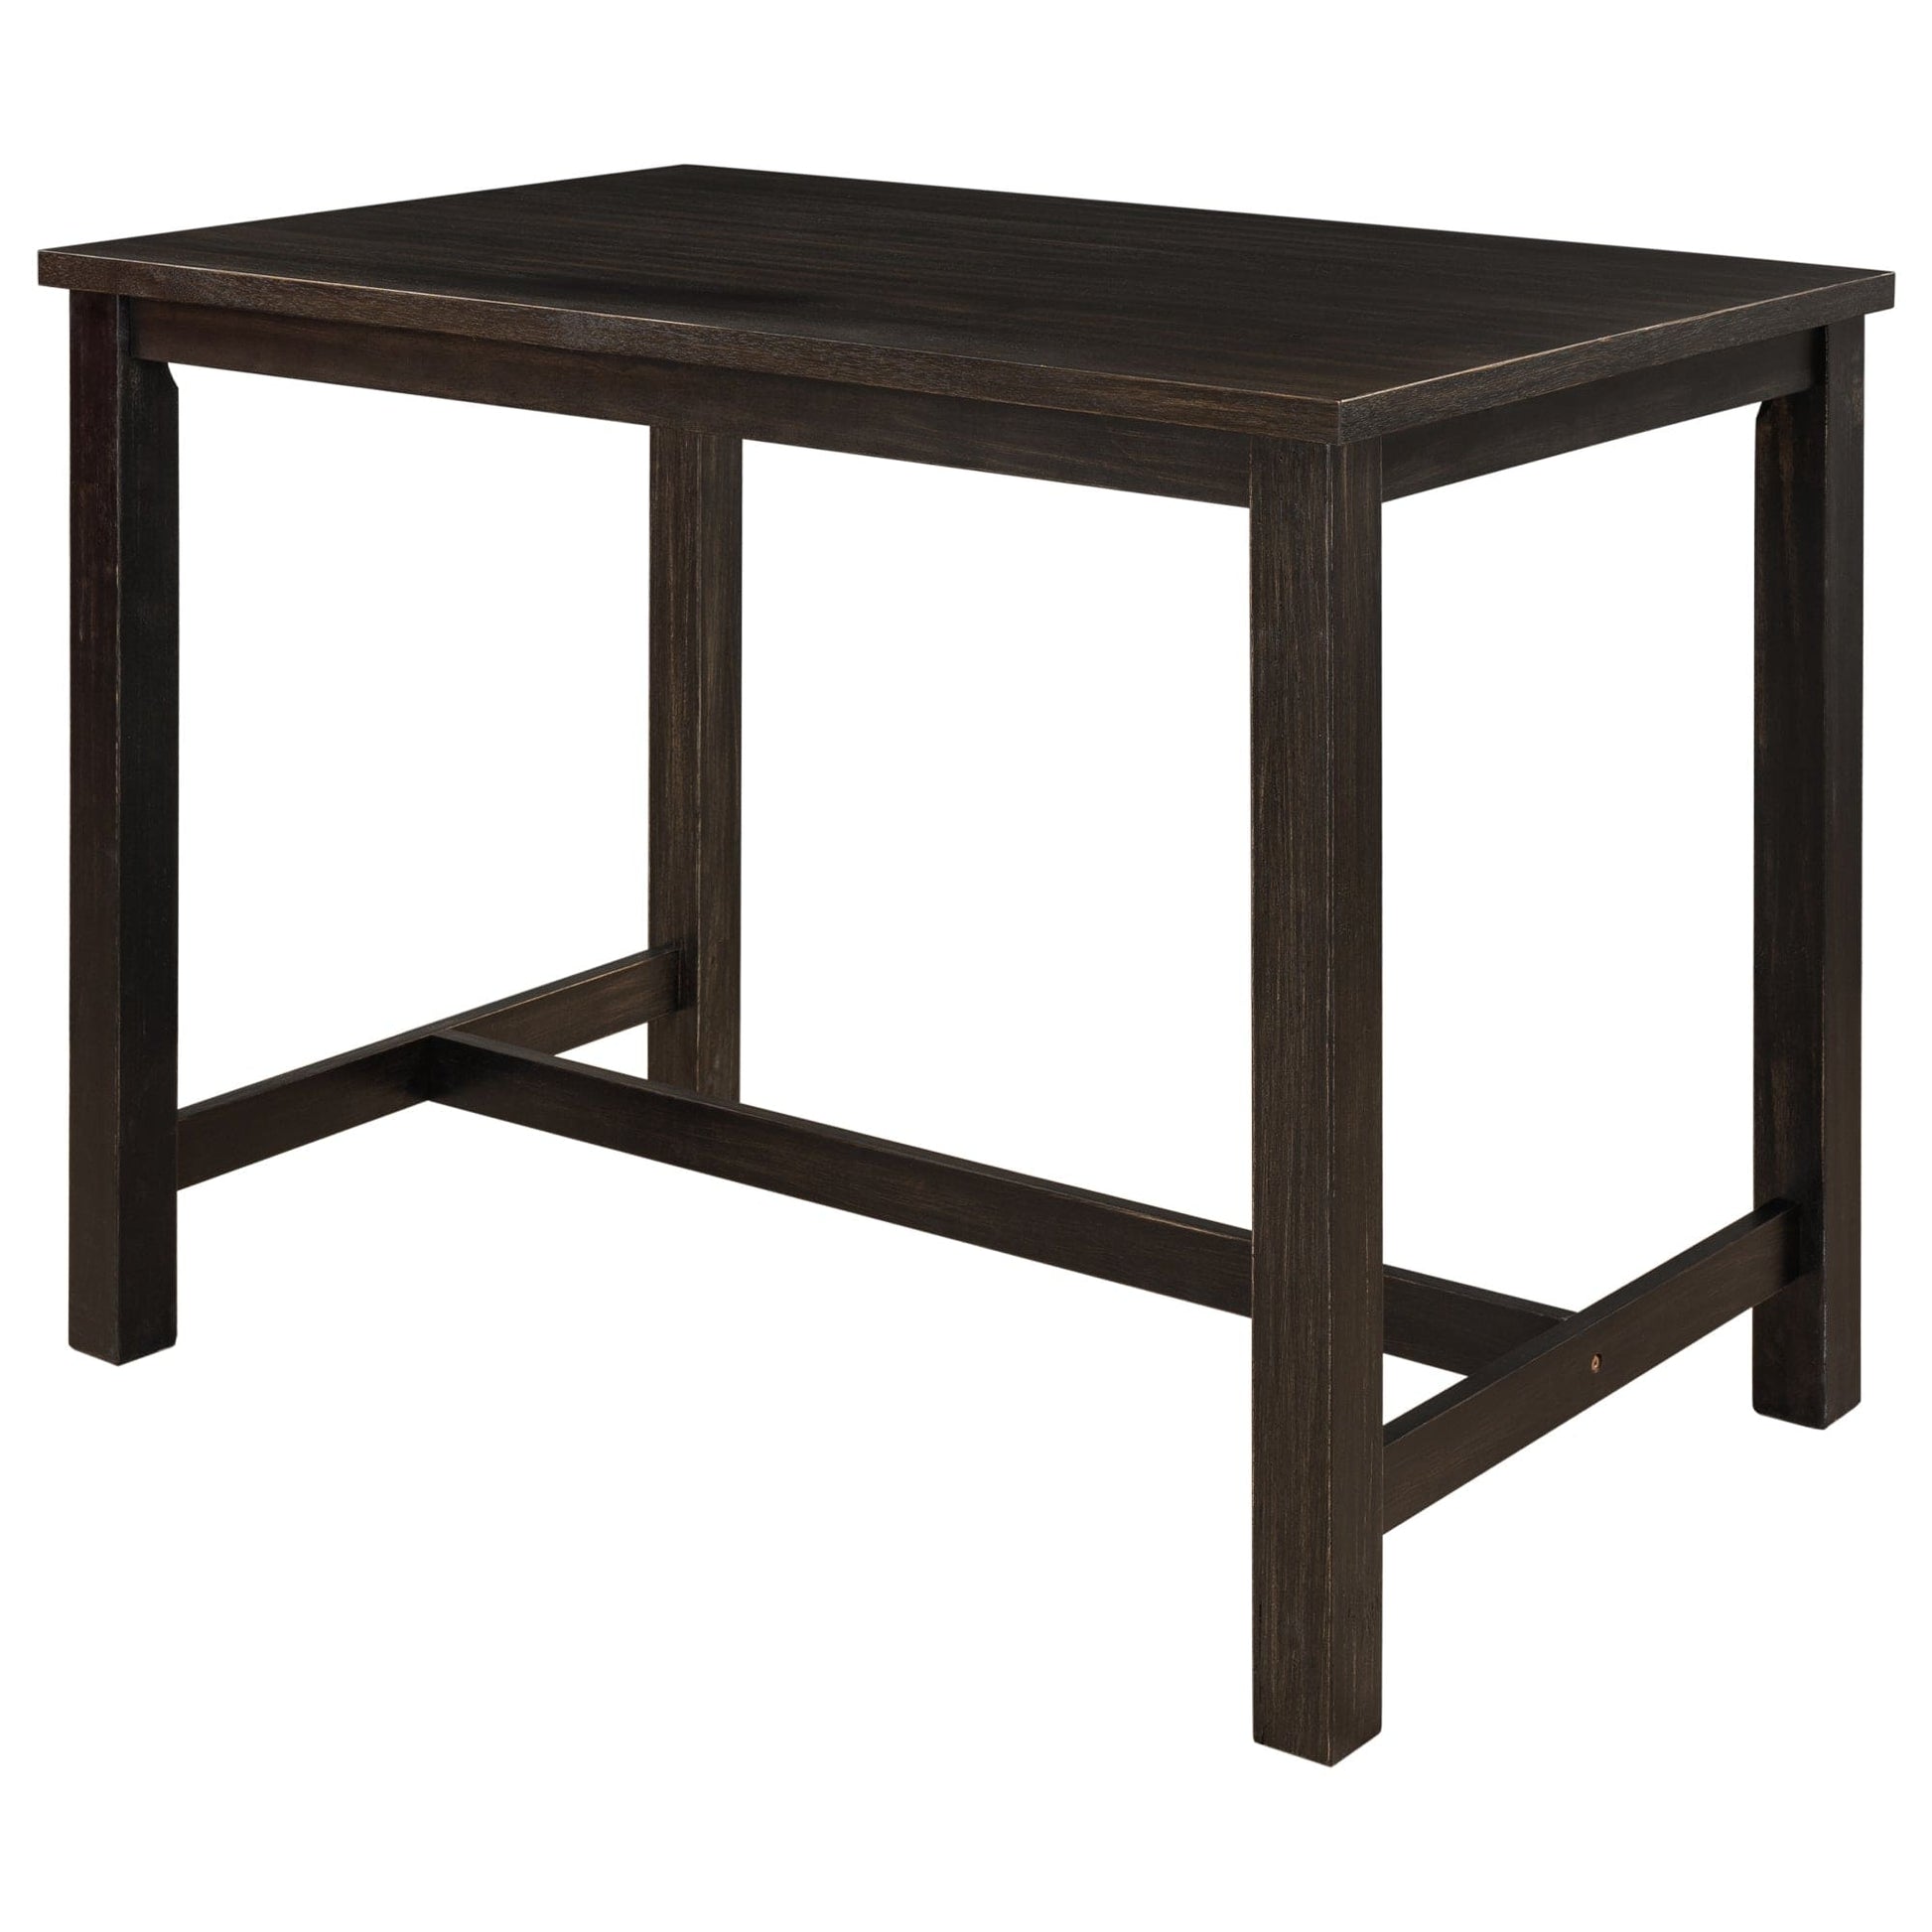 1st Choice Furniture Direct Dining Table 1st Choice Rustic Counter Height Dining Table in Espresso Finish